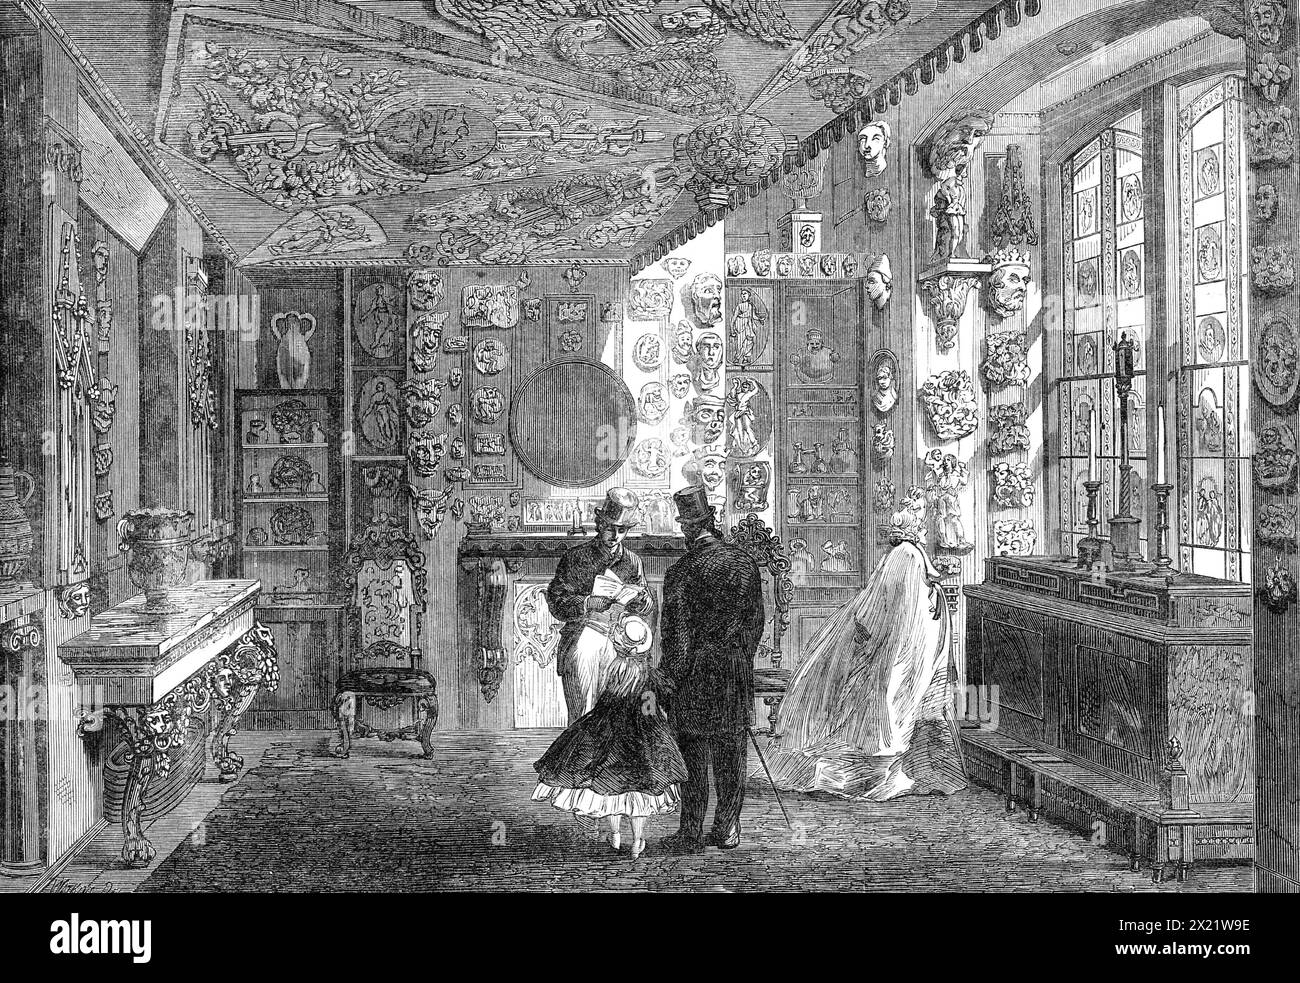 Sir John Soane's Museum in Lincoln's-Inn-Fields: the Monks' Parlour, 1864. 'We now descend to the Monks' Parloir, which has its ceiling and walls mostly covered with fragments and casts of ecclesiastical and other structures, carvings in wood and ivory, and engraved brasses; vases found in ancient Peruvian tombs, painted glass, &amp;c.; and a fine Flemish carving, in wood, of the Crucifixion'. From &quot;Illustrated London News&quot;, 1864. Stock Photo